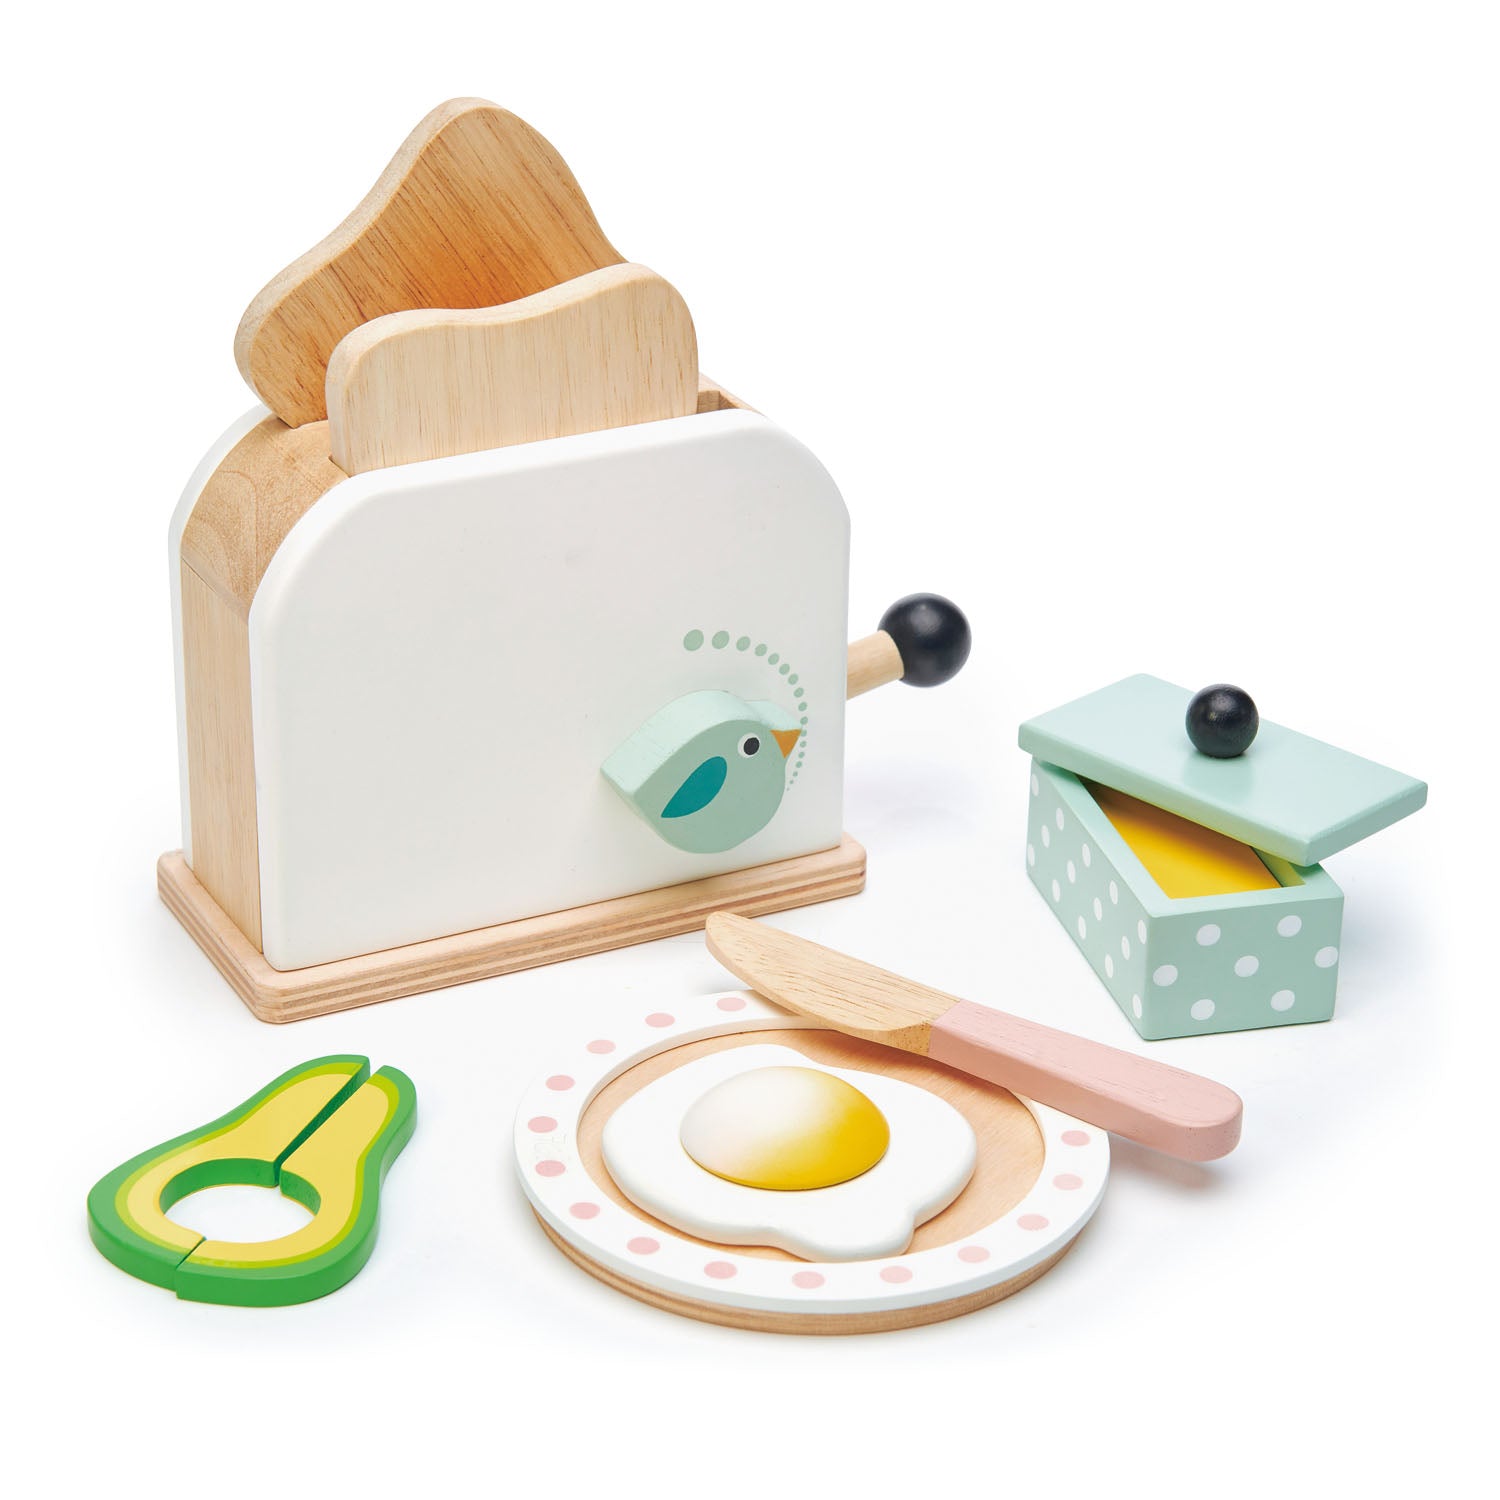 <p>Toast your 2 slices of bread, turn the birdie dial to hot, pop them up when they are ready, butter the toast with the wooden knife, and top with a poached egg and 2 slices of avocado.</p>
<p>Plate and butter dish are included.</p>
<p>Age range: 3 Years And Older  </p>
<p>Product size: 6.3 x 7.28 x 5.71”  </p>
<p> Weight: 1.76 lbs</p>
<p><a href="https://www.dropbox.com/s/lm05r9nxlkaiqqn/TL8226%20Tasty%20Toast%20Toppings%20Printable.pdf?dl=0" title="Tasty Toast Toppings Printable"><img src="https://cdn.shopify.com/s/files/1/1083/1780/files/TL8226-Tasty-Toast-Toppings-Printable-dl_480x480.jpg?v=1597916224" alt="Tasty Toast Toppings Printable"></a></p>
